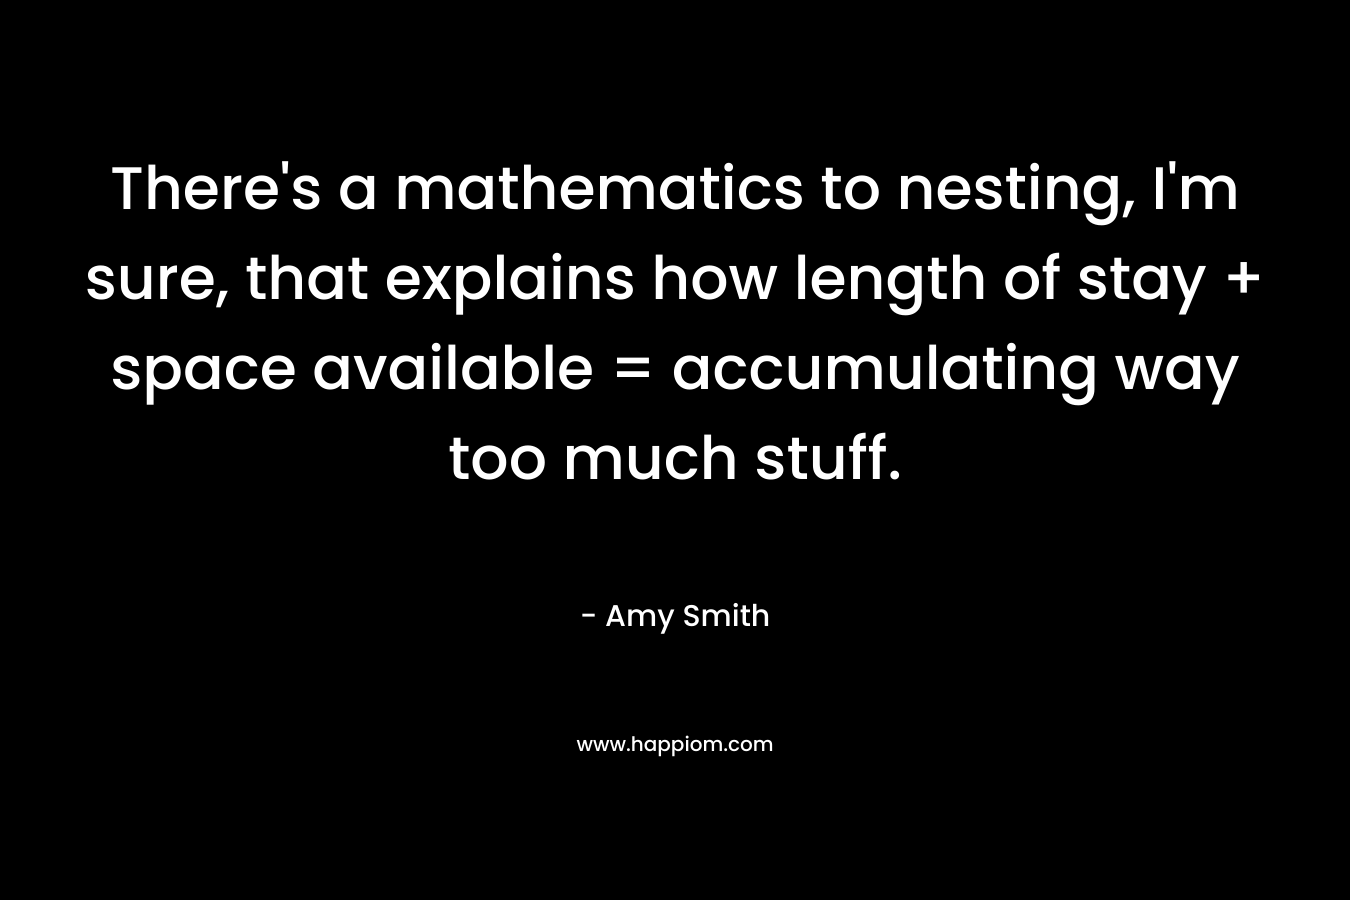 There's a mathematics to nesting, I'm sure, that explains how length of stay + space available = accumulating way too much stuff.